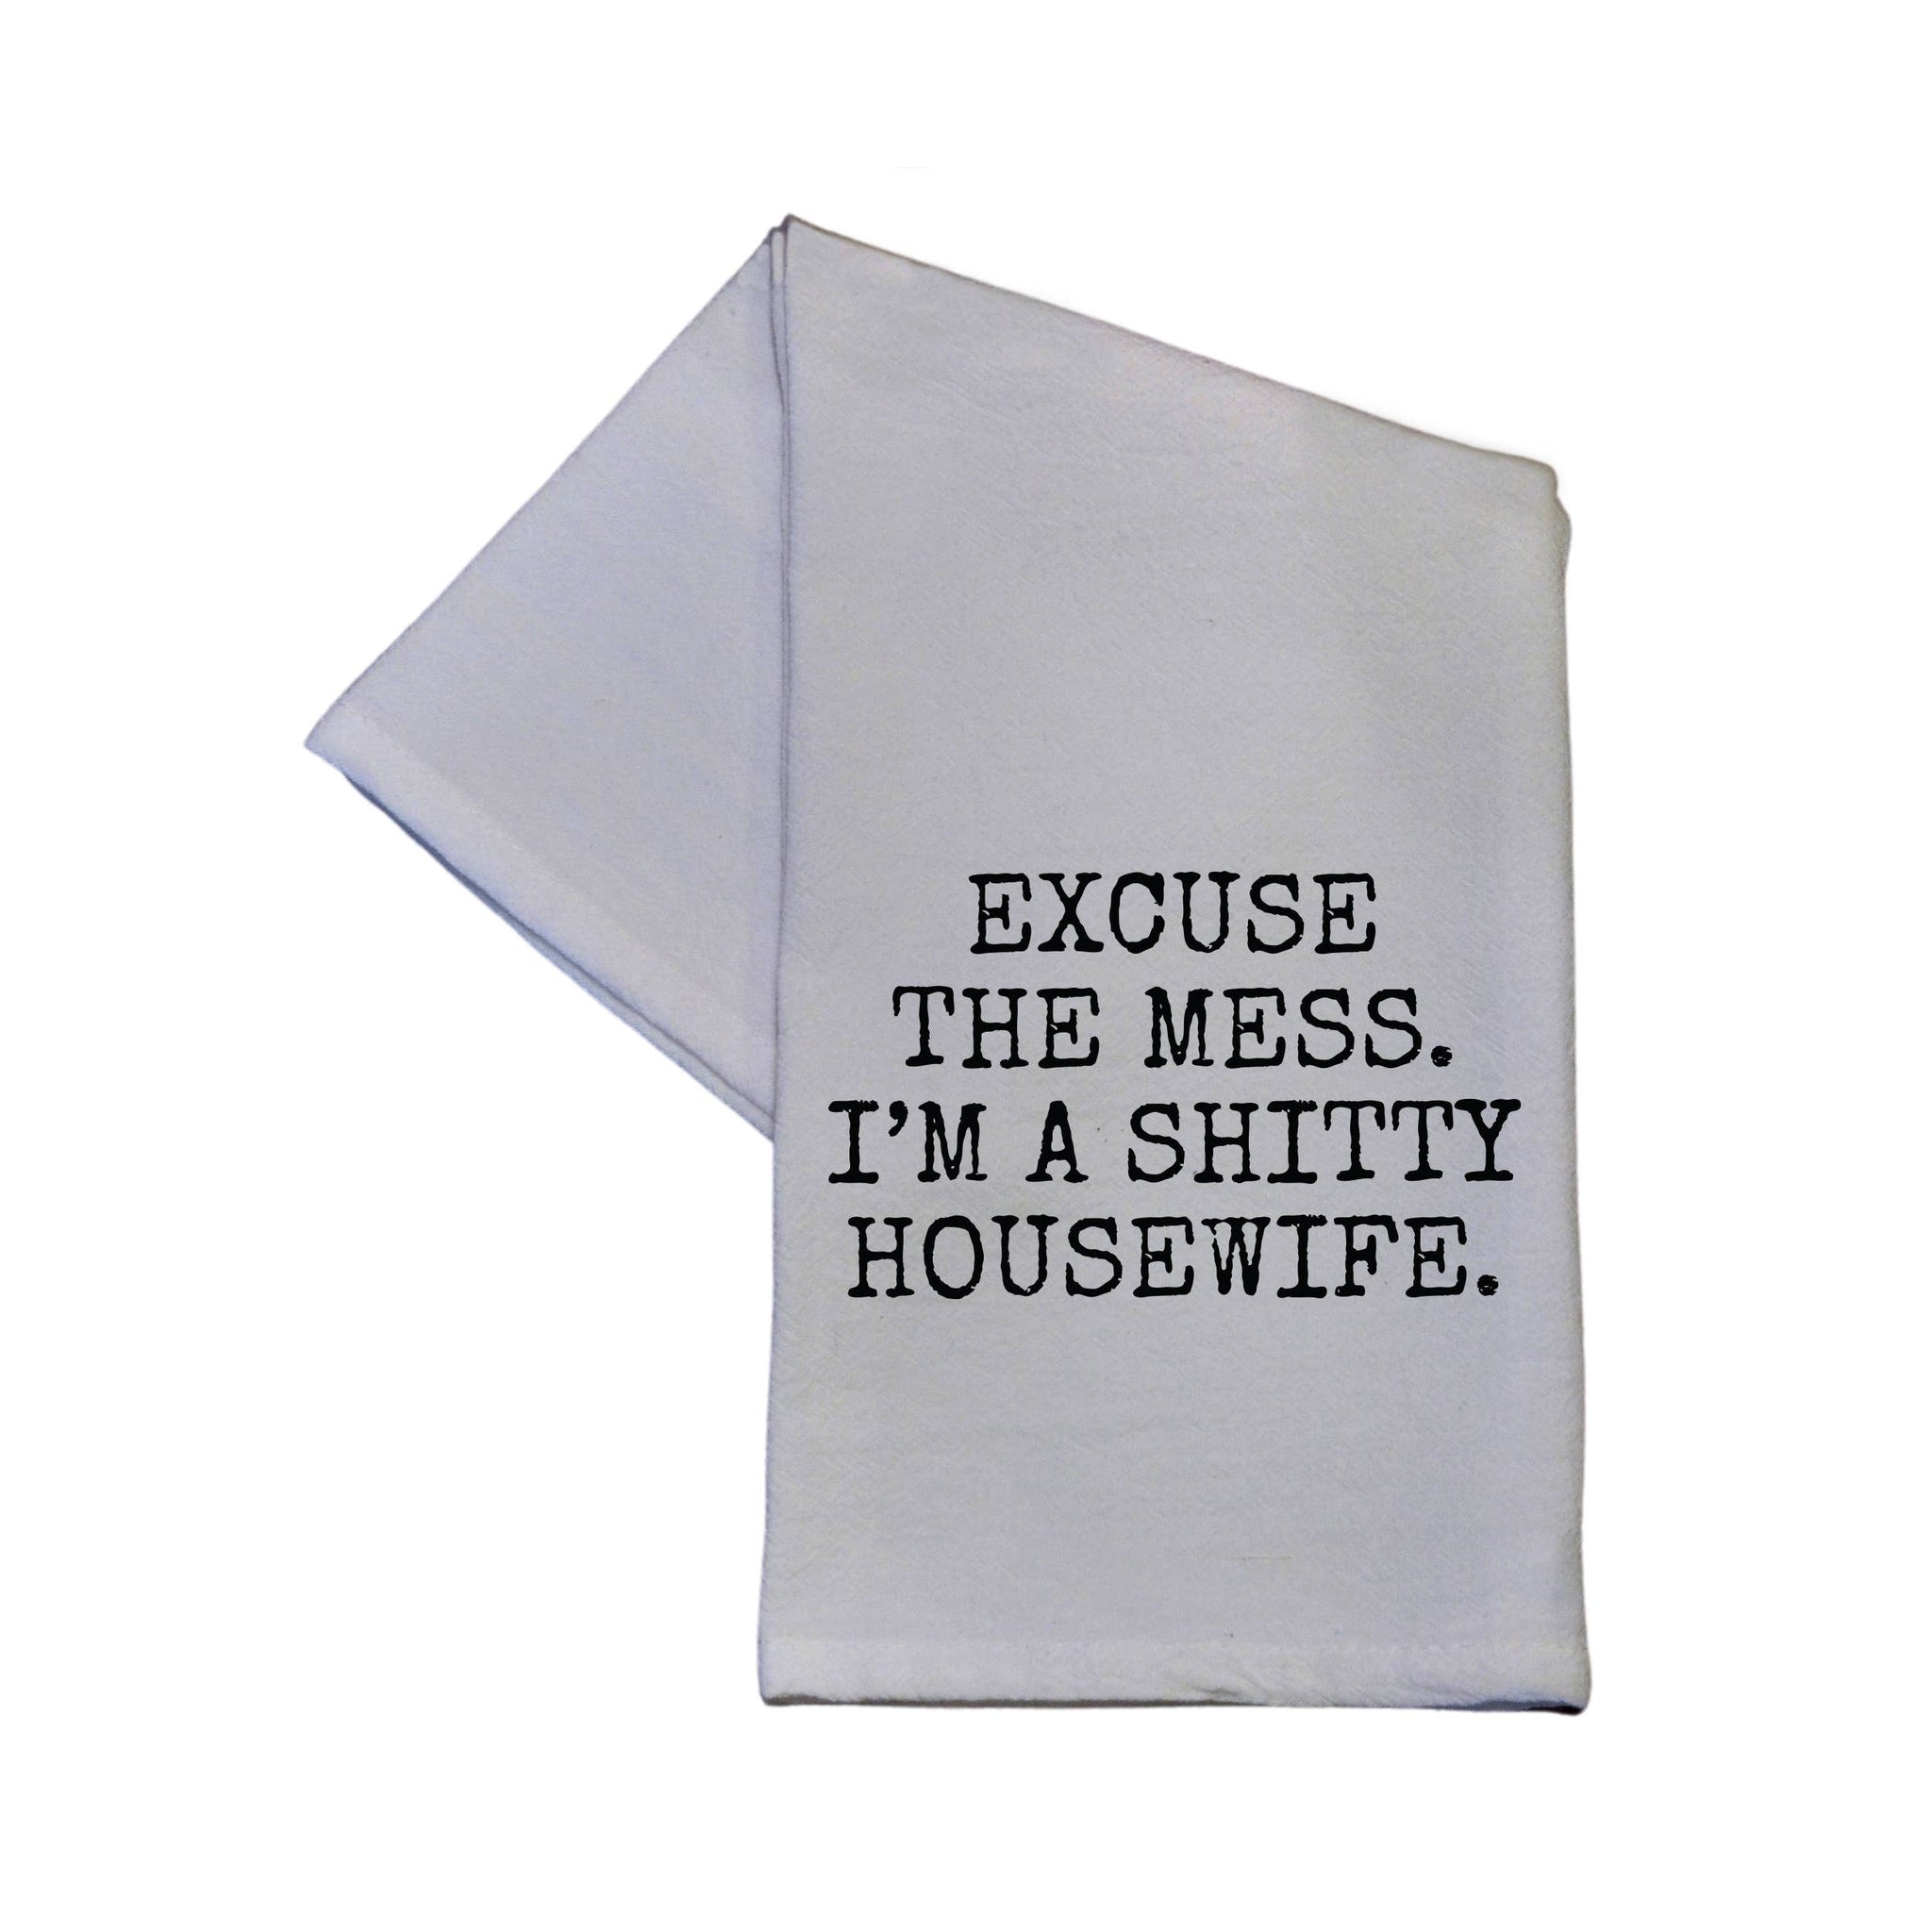 Driftless Studios - I'm A Shitty Housewife Funny Dish Towel 16x24 Cotton